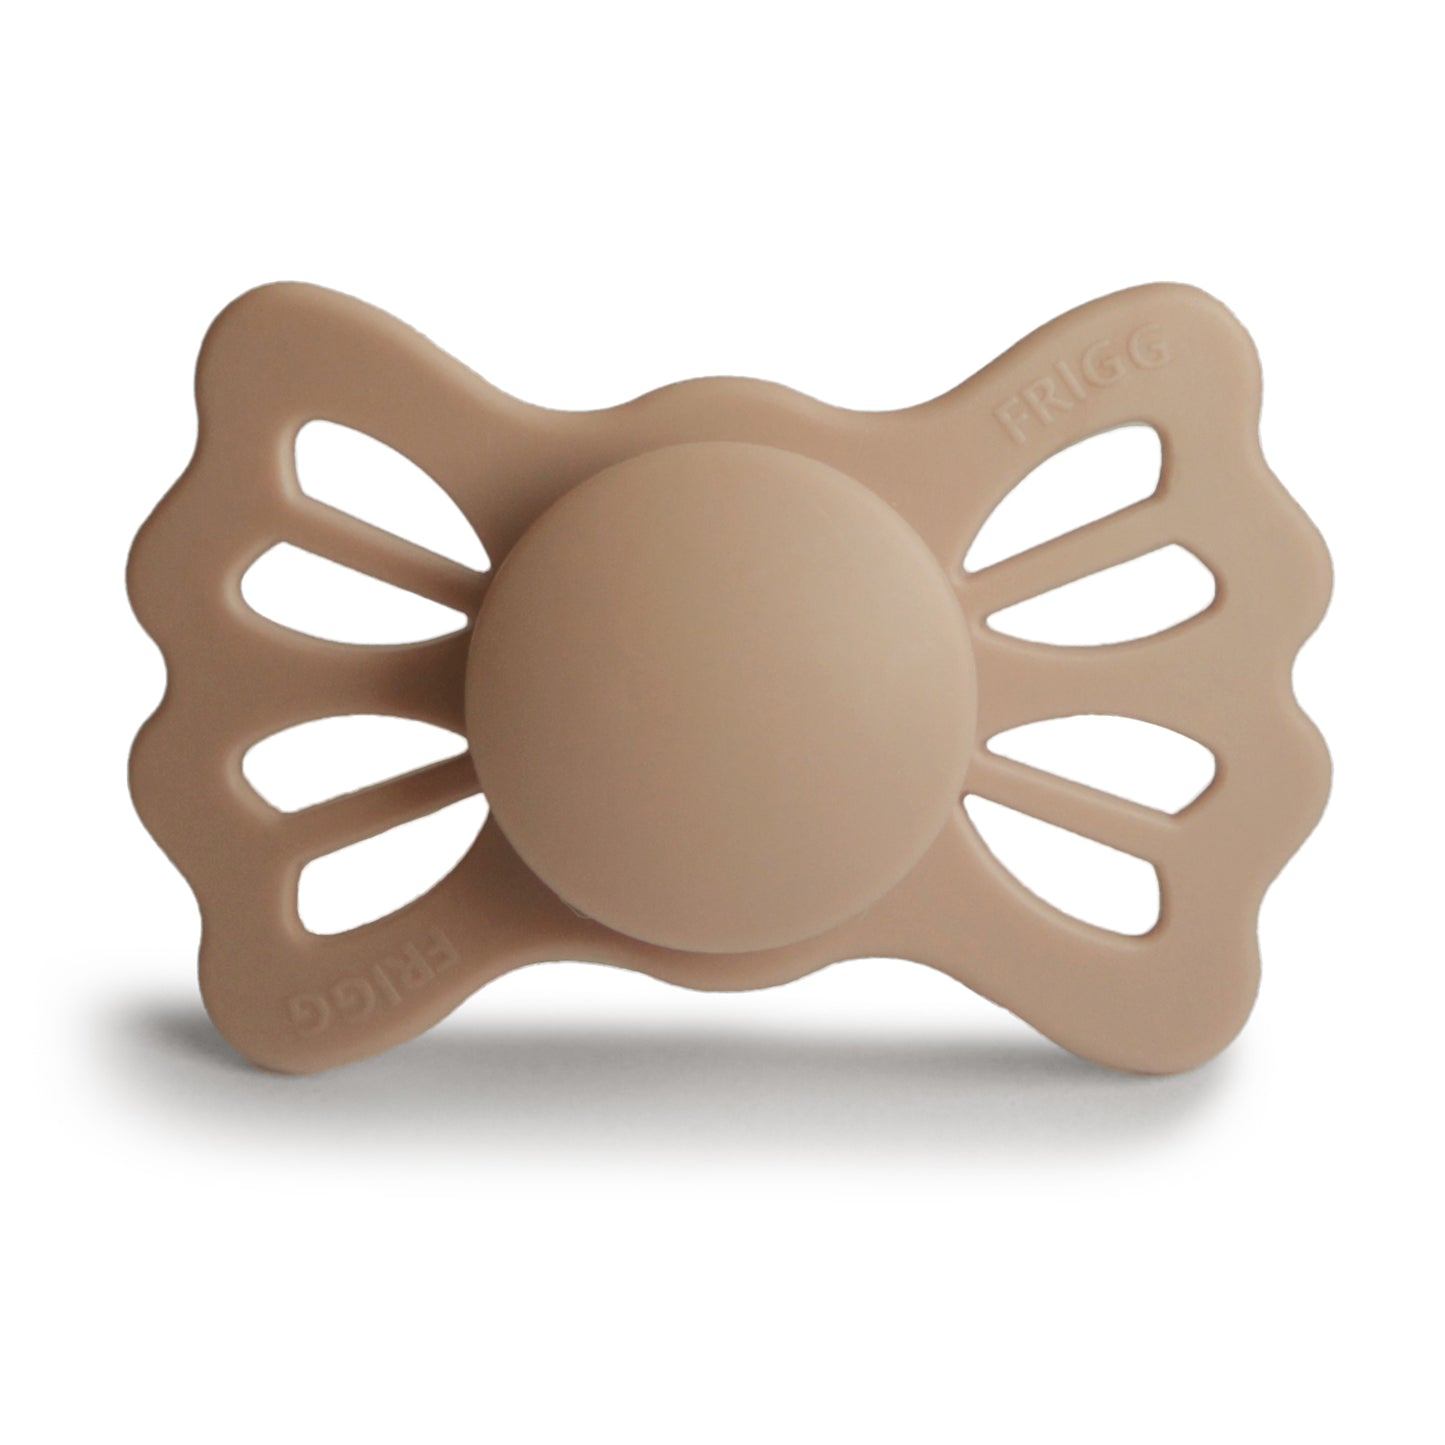 Frigg pacifier - Lucky, Symmetrical, silicone size 1 and 2